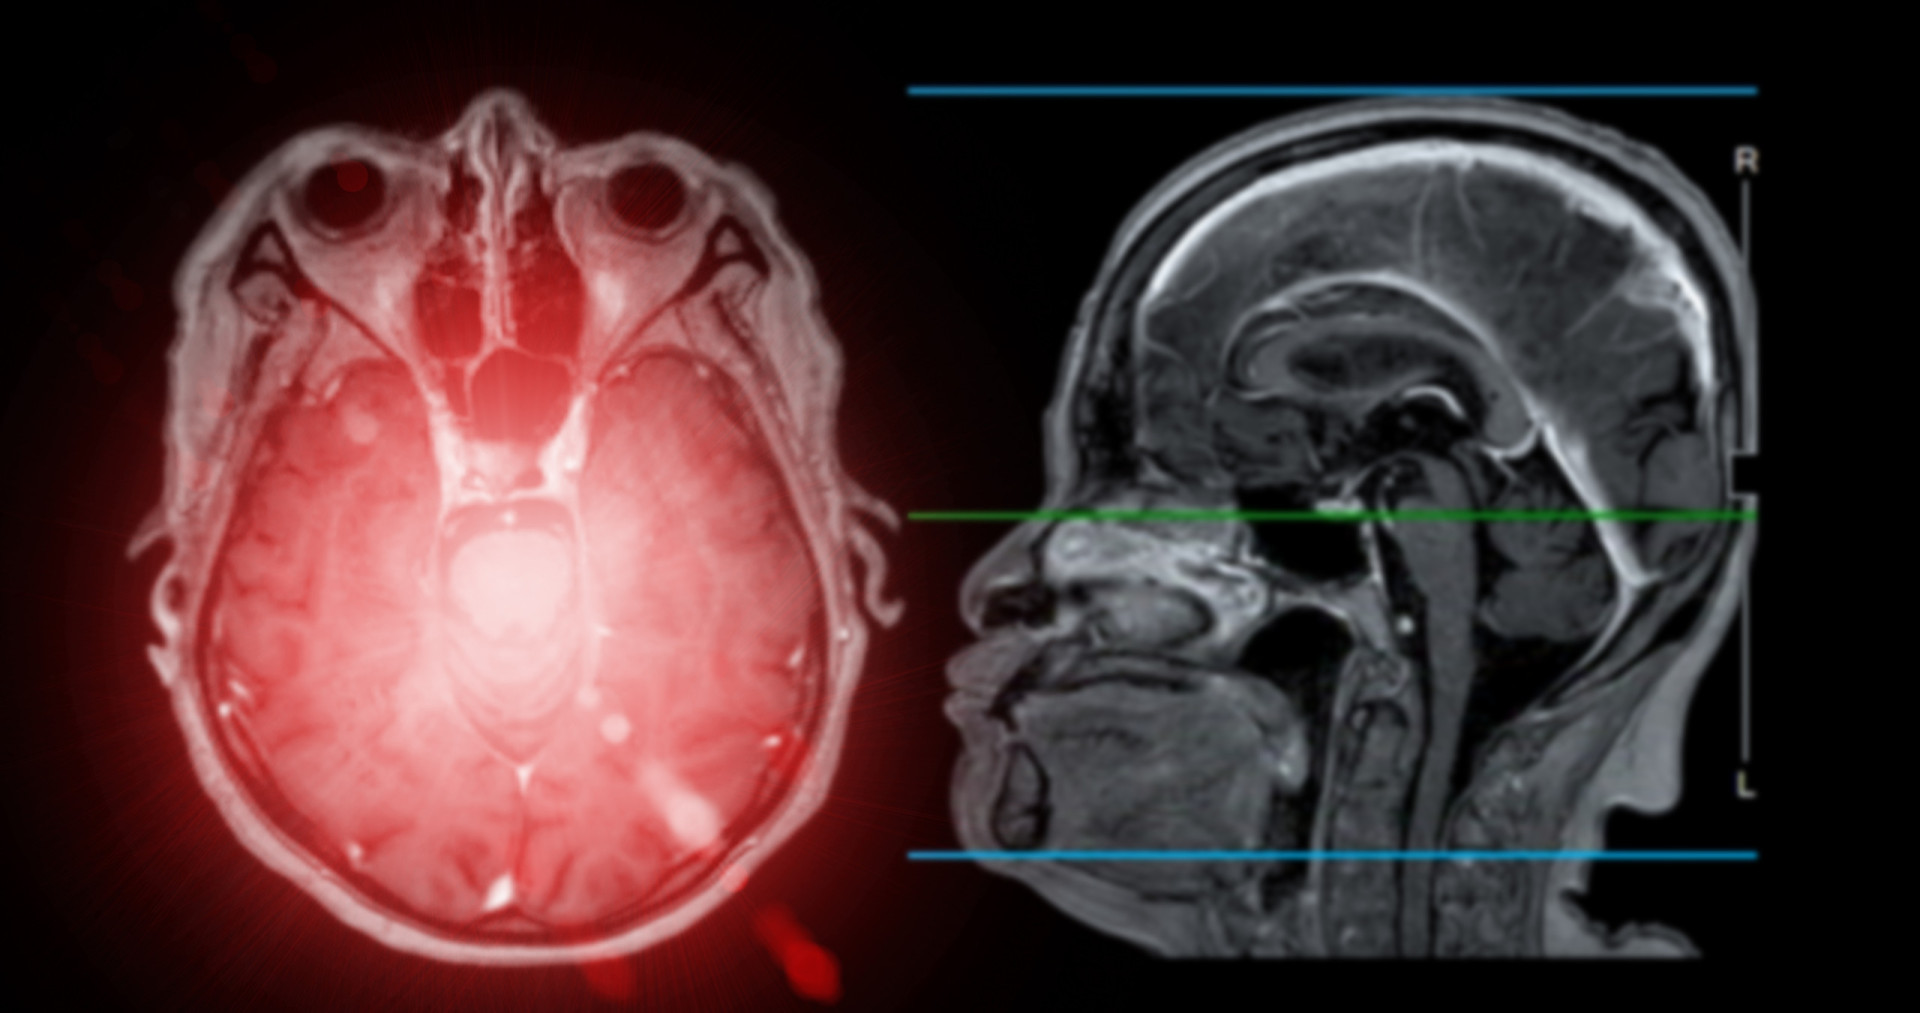 Recognizing the warning signs of a stroke